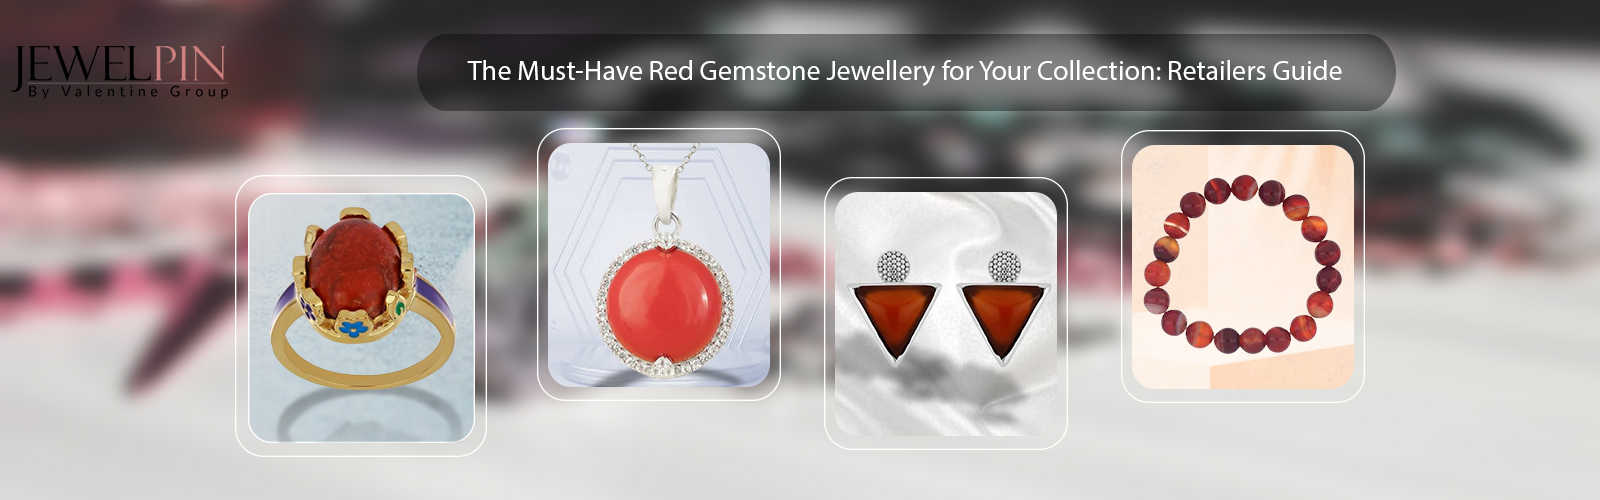 JewelPIn - The Must-Have Red Gemstone Jewellery for Your Collection: Retailers Guide